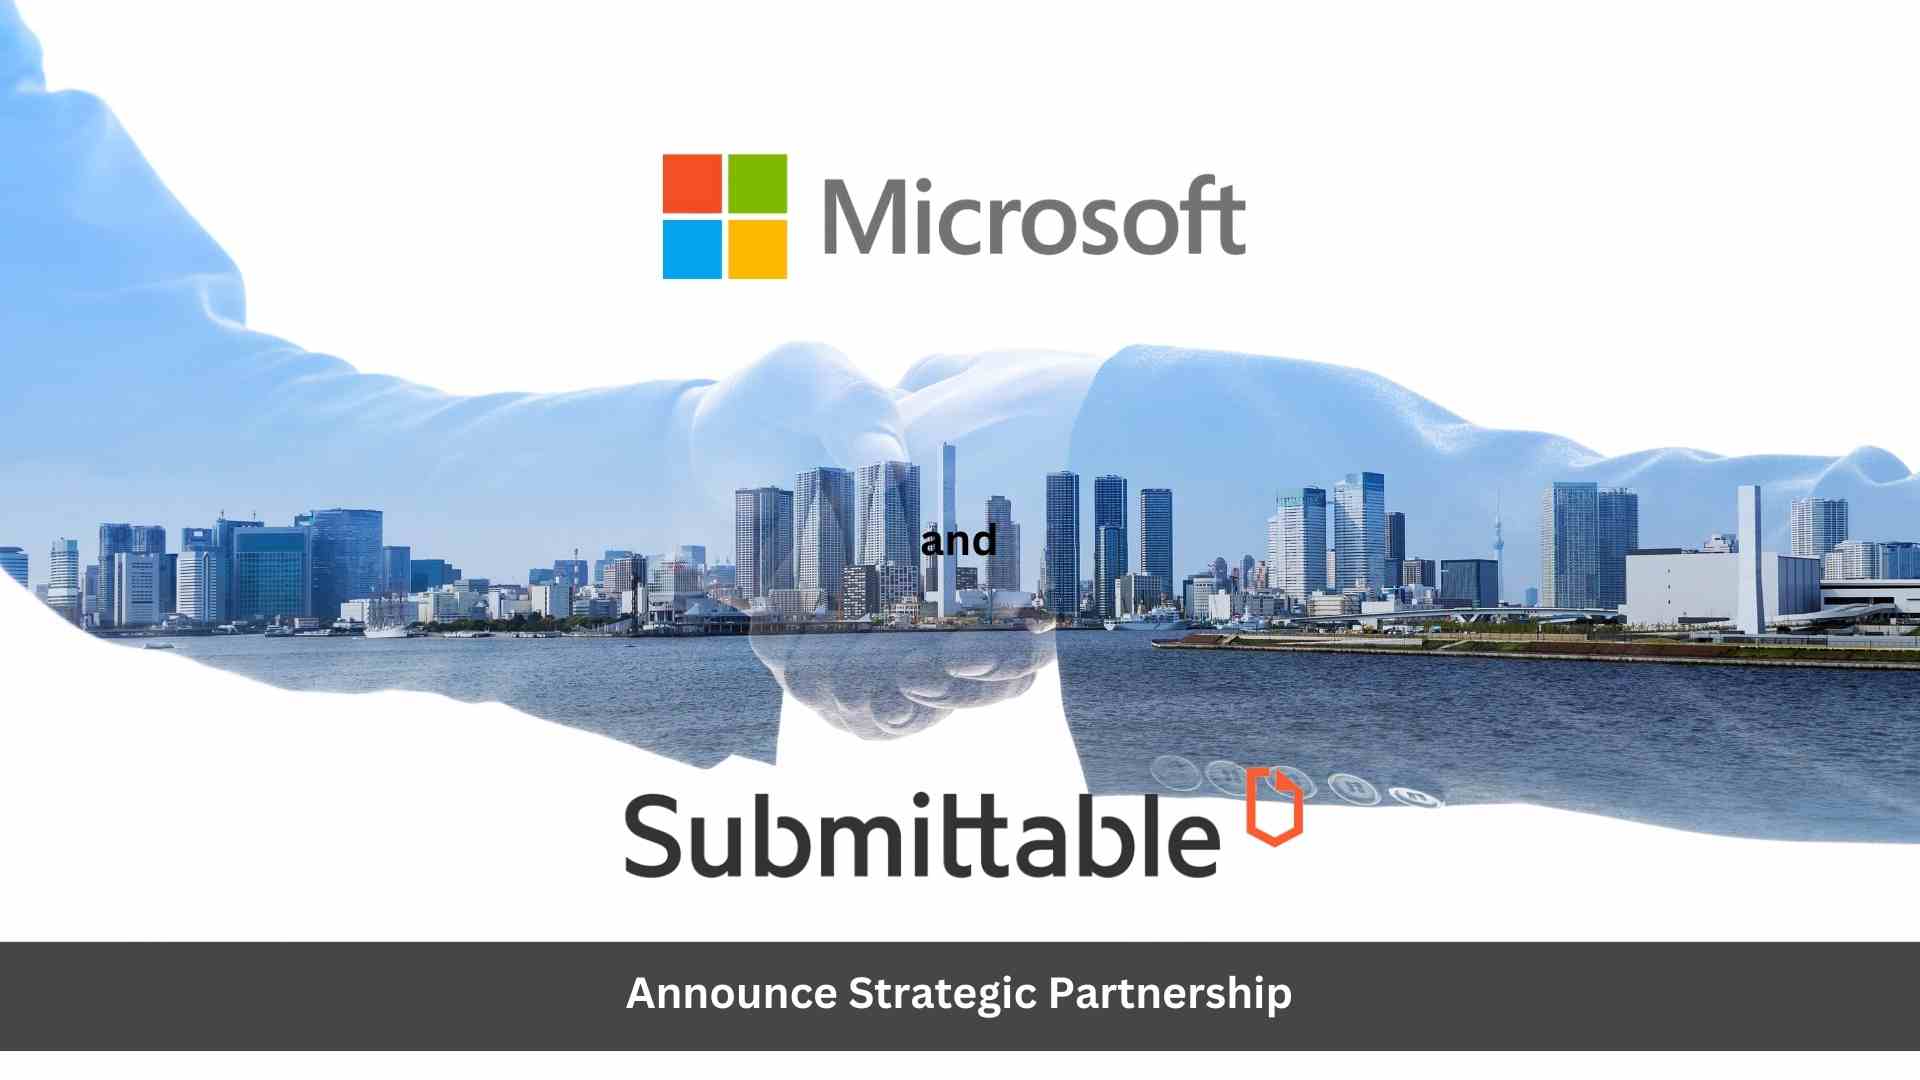 Microsoft and Submittable to collaborate on the future of social impact in the cloud